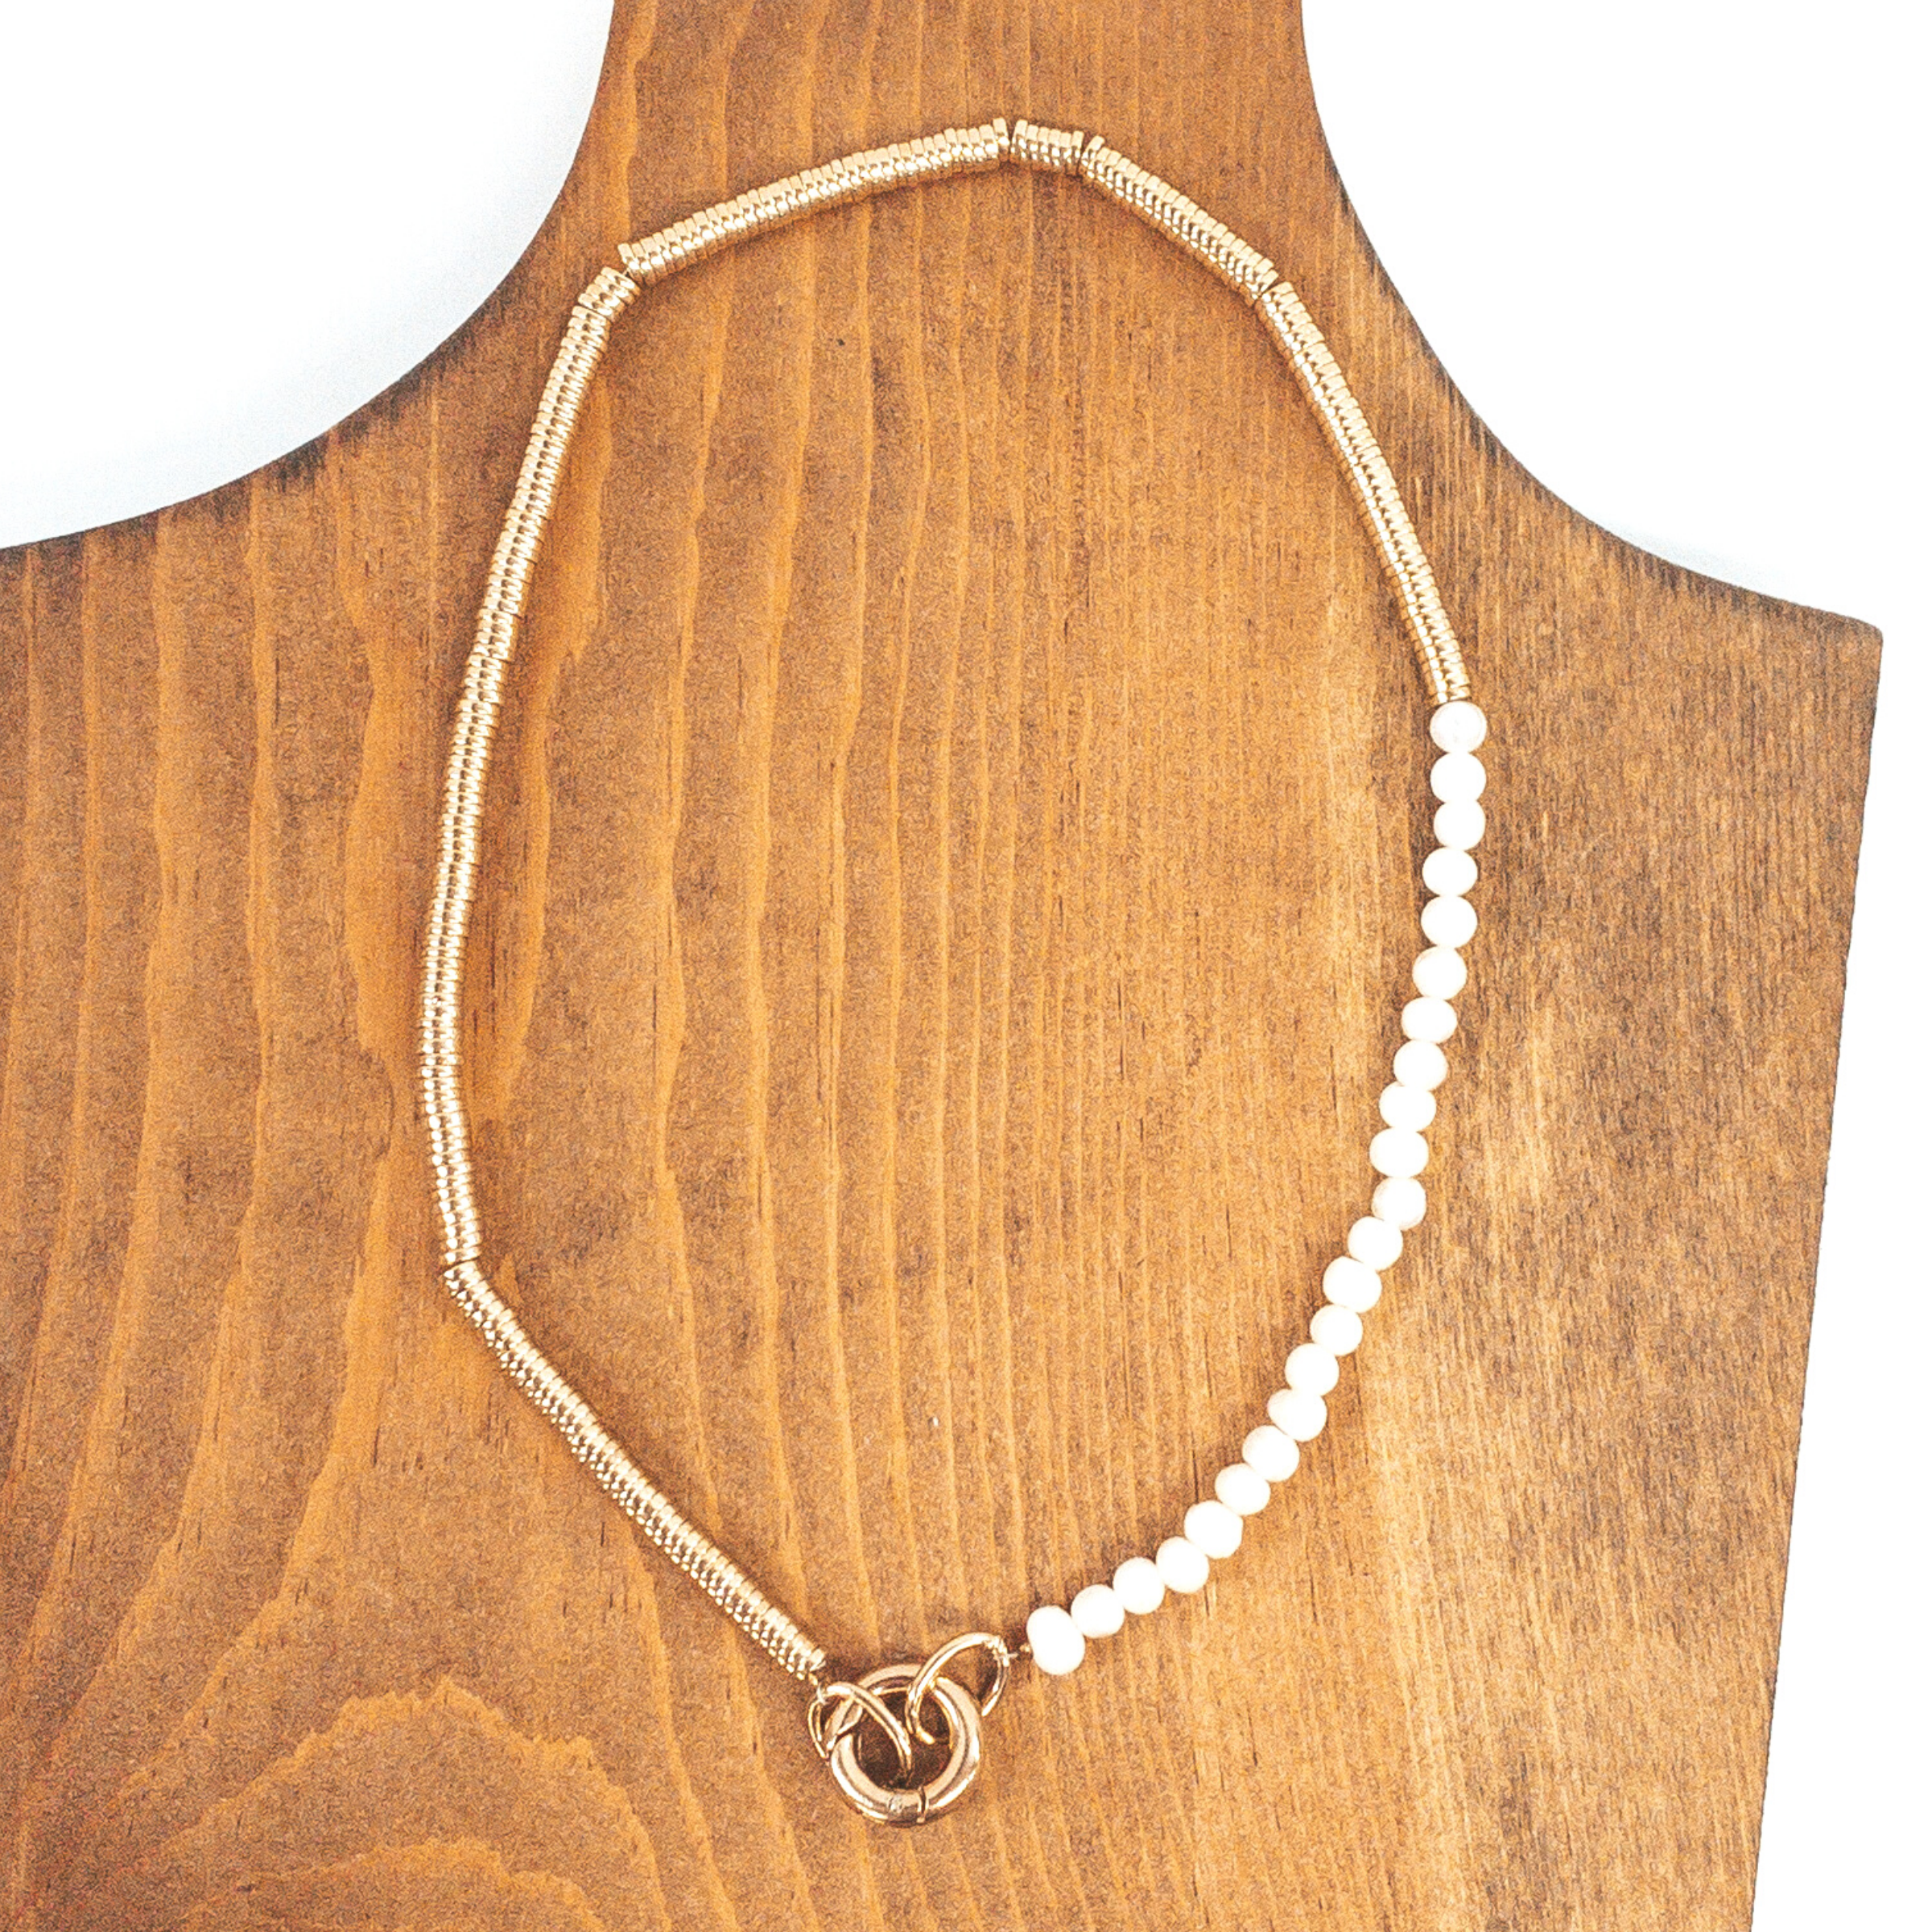 Three quarters of the necklace is gold metal disk beads, while the last quarter is white pearl like beads. There is a gold clasp to close it. This necklace is pictured on a wood necklace holder on a white background. 